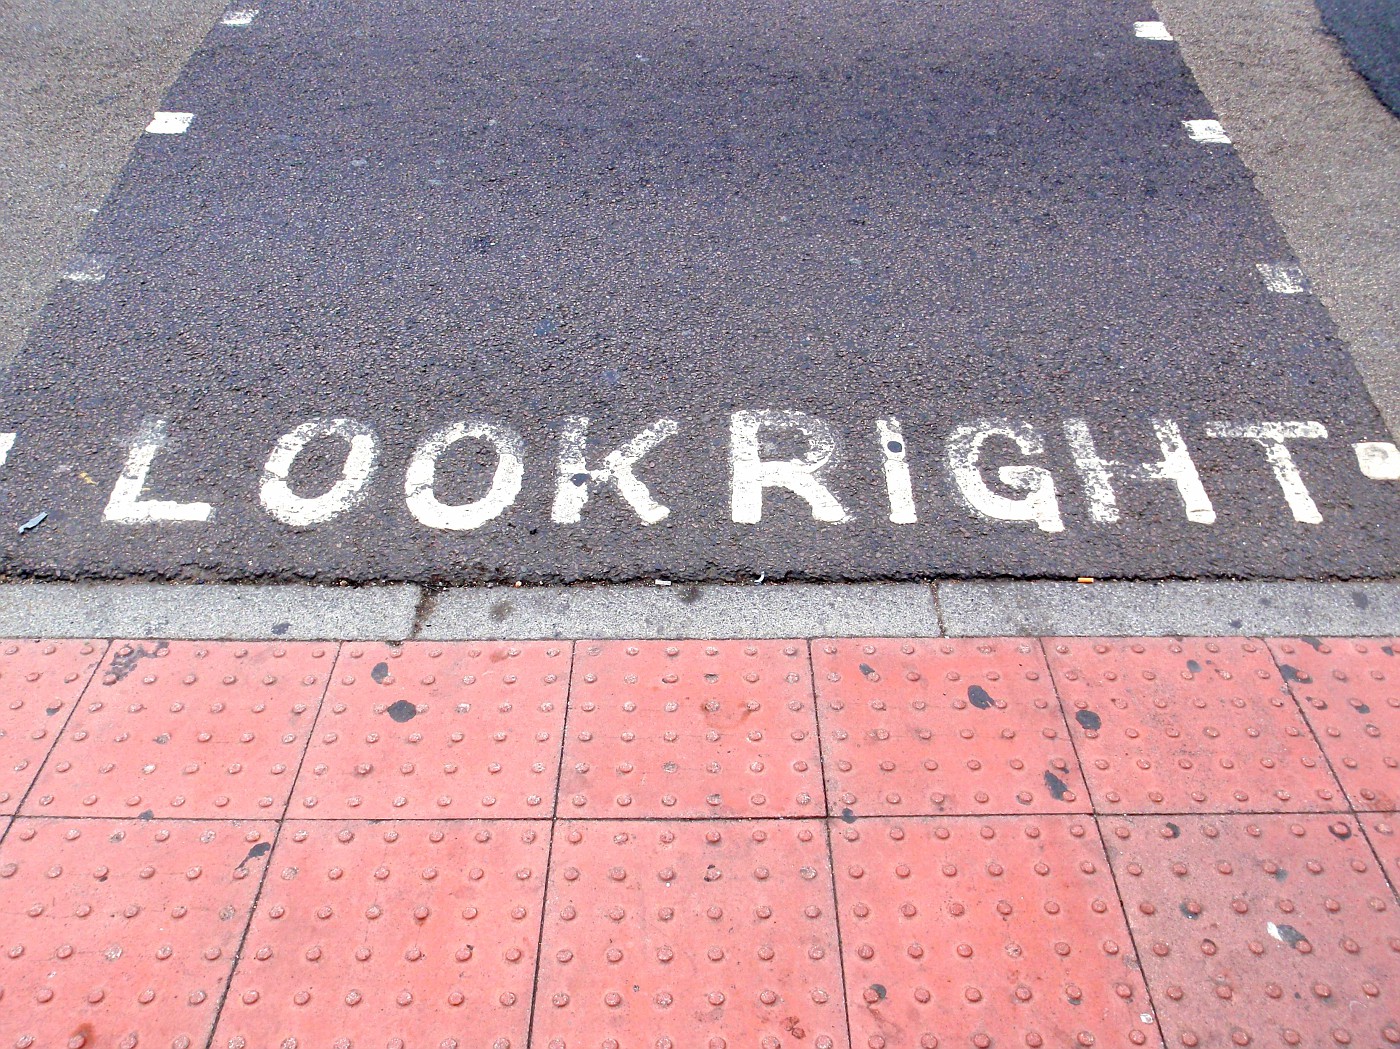 Look right!